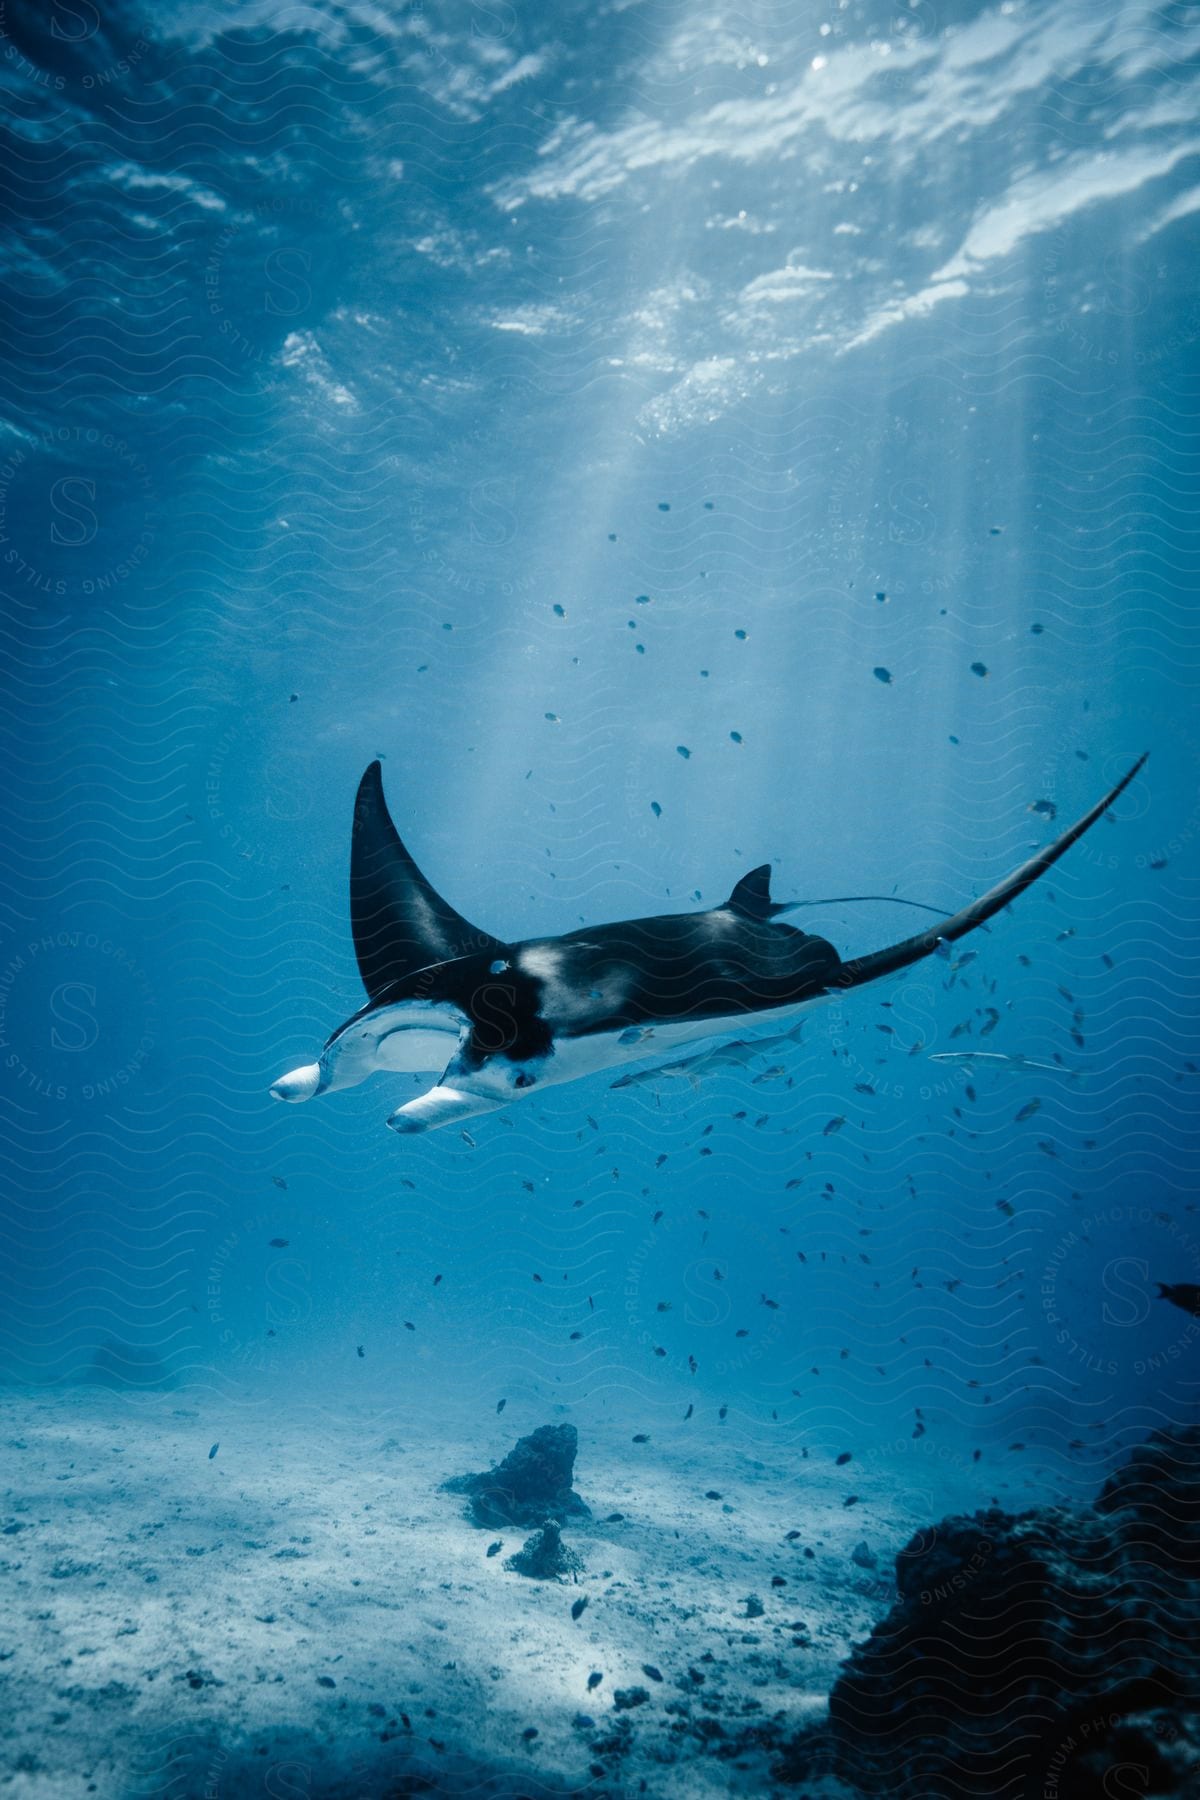 Underwater shot of a manta ray swimming in the blue ocean waters